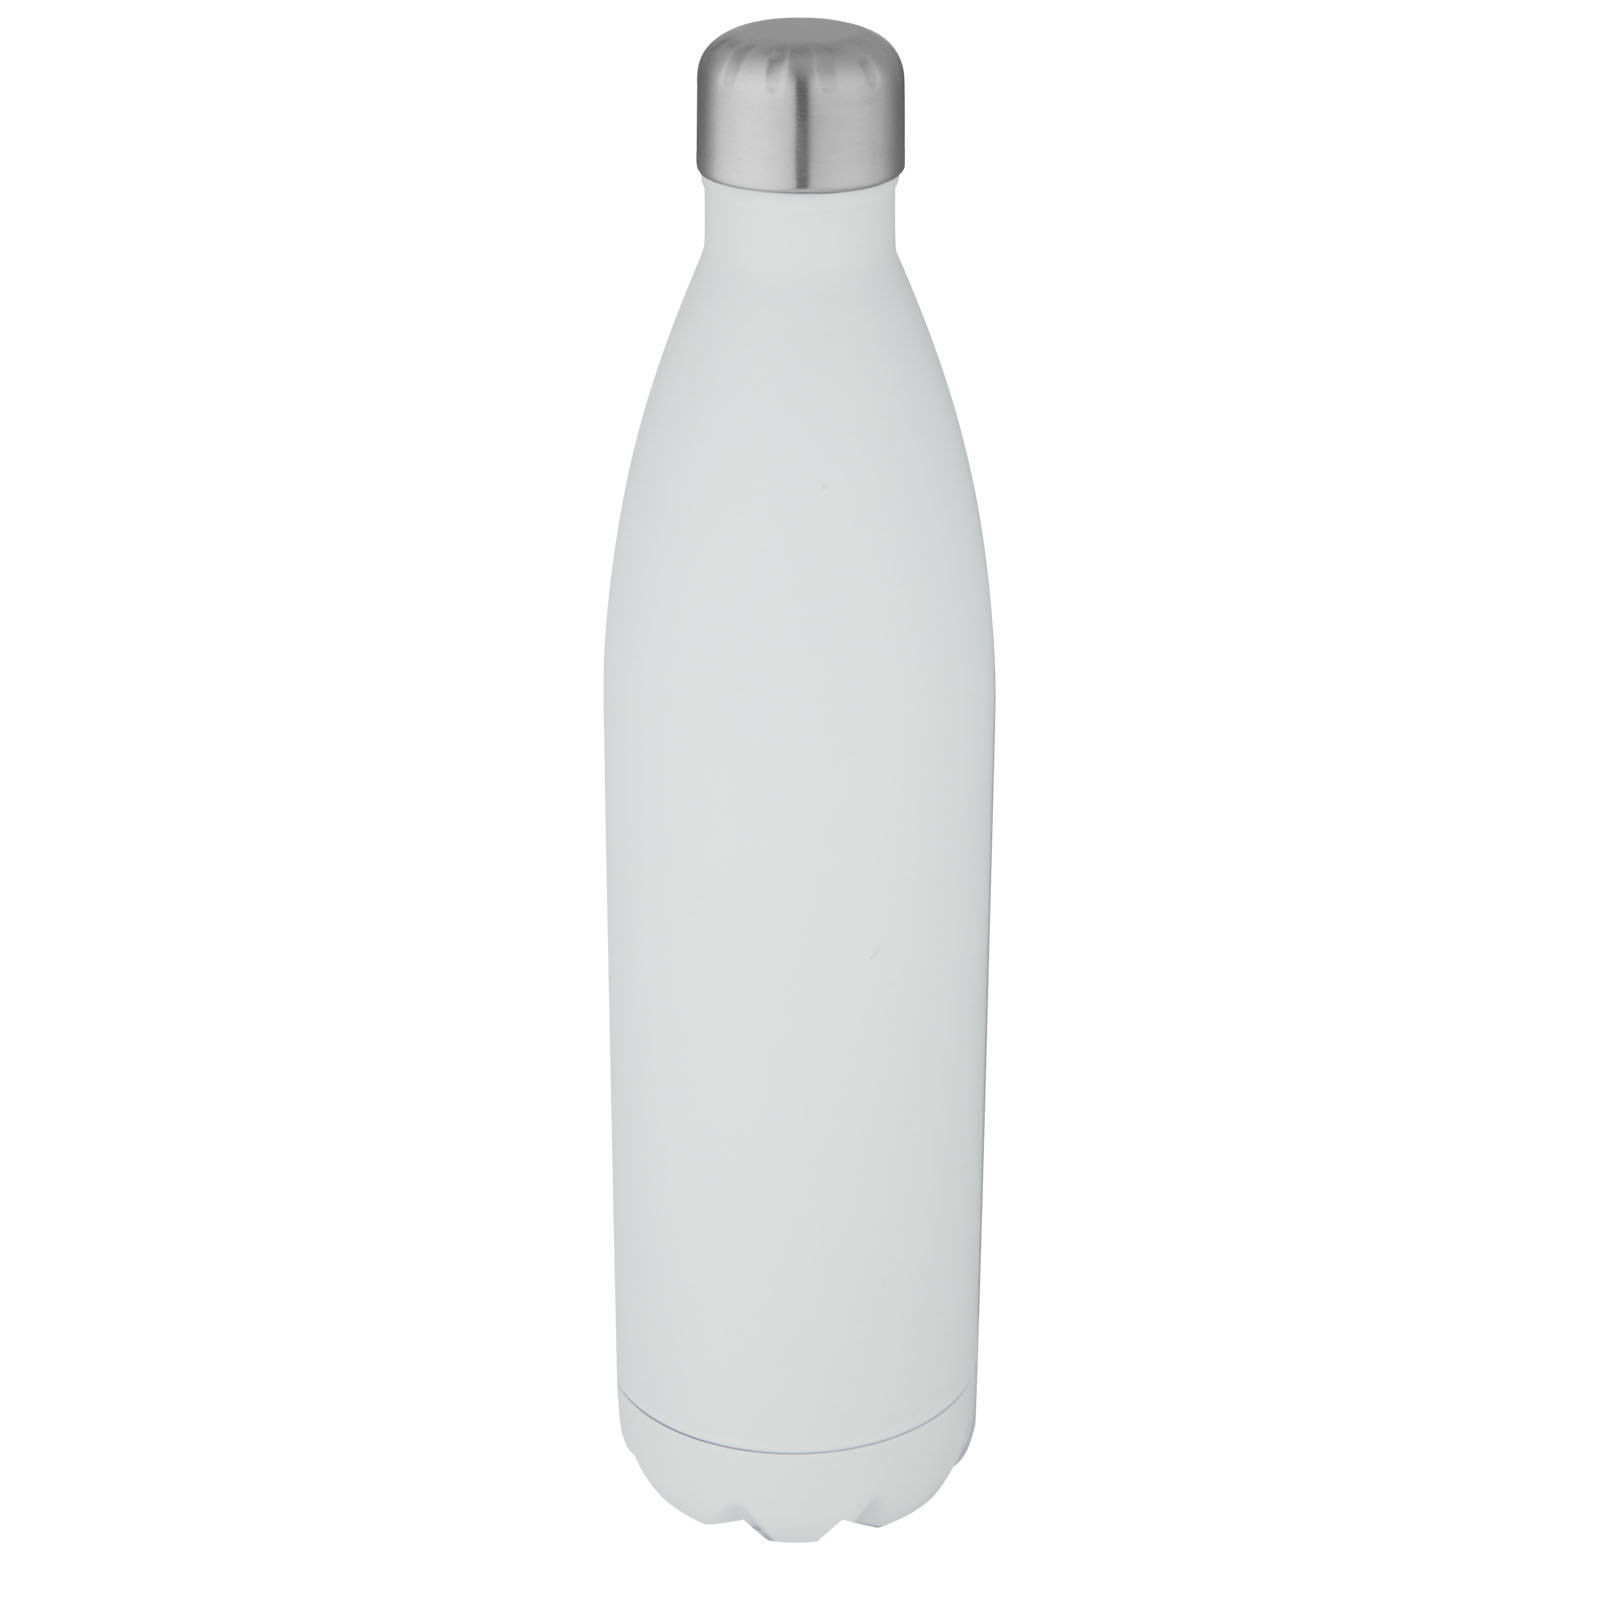 Insulated bottles - Cove 1 L vacuum insulated stainless steel bottle